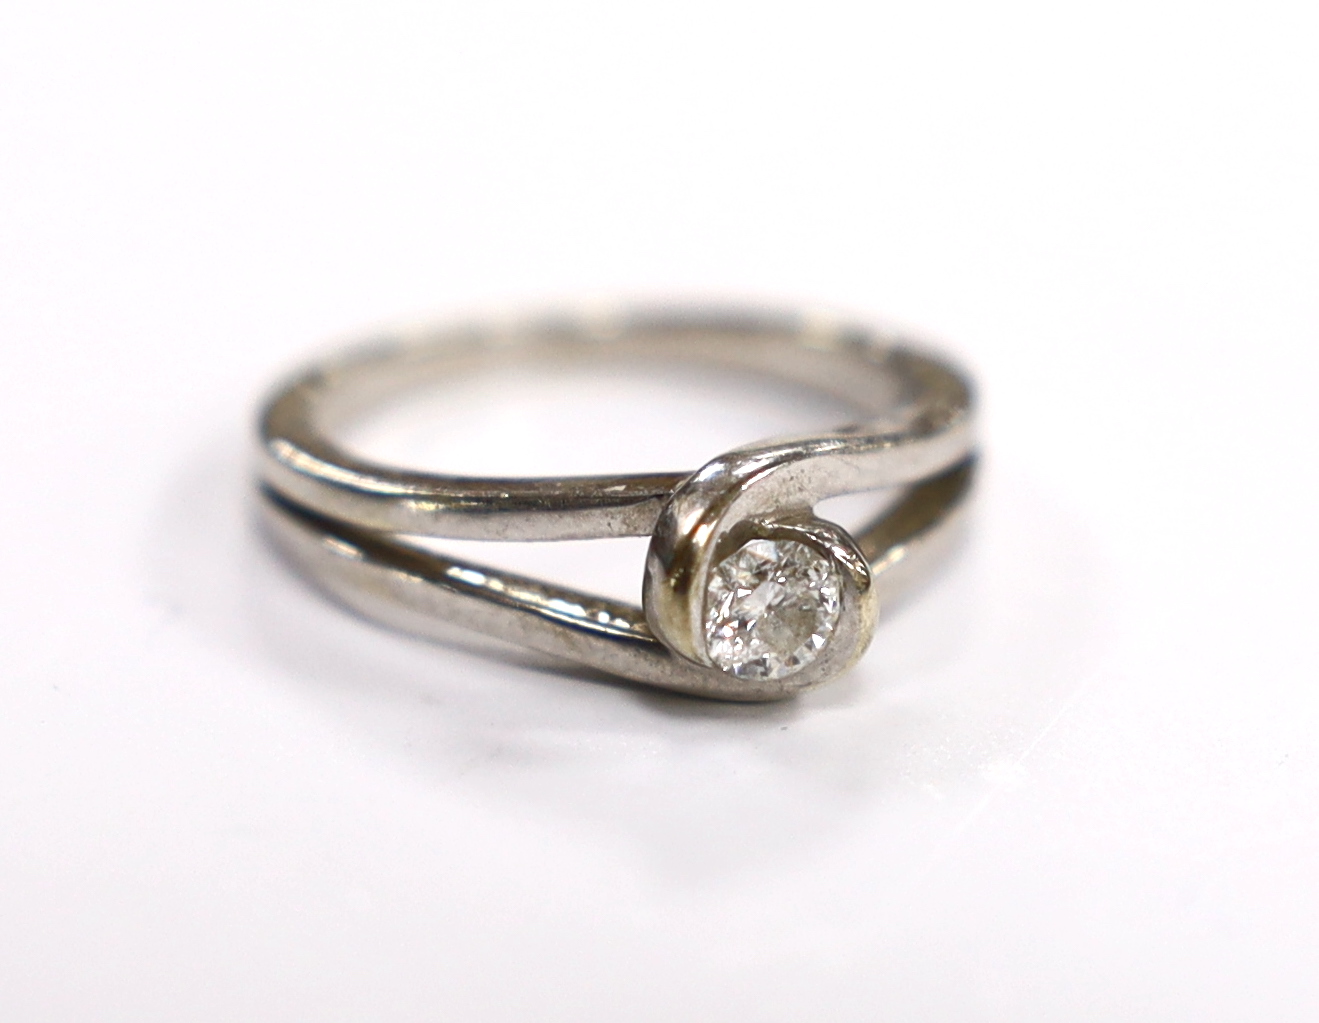 A 9ct white gold and solitaire stone diamond set ring, the stone weighing approx. 0.15cts, size L/M, gross weight 3.4 grams.                                                                                                